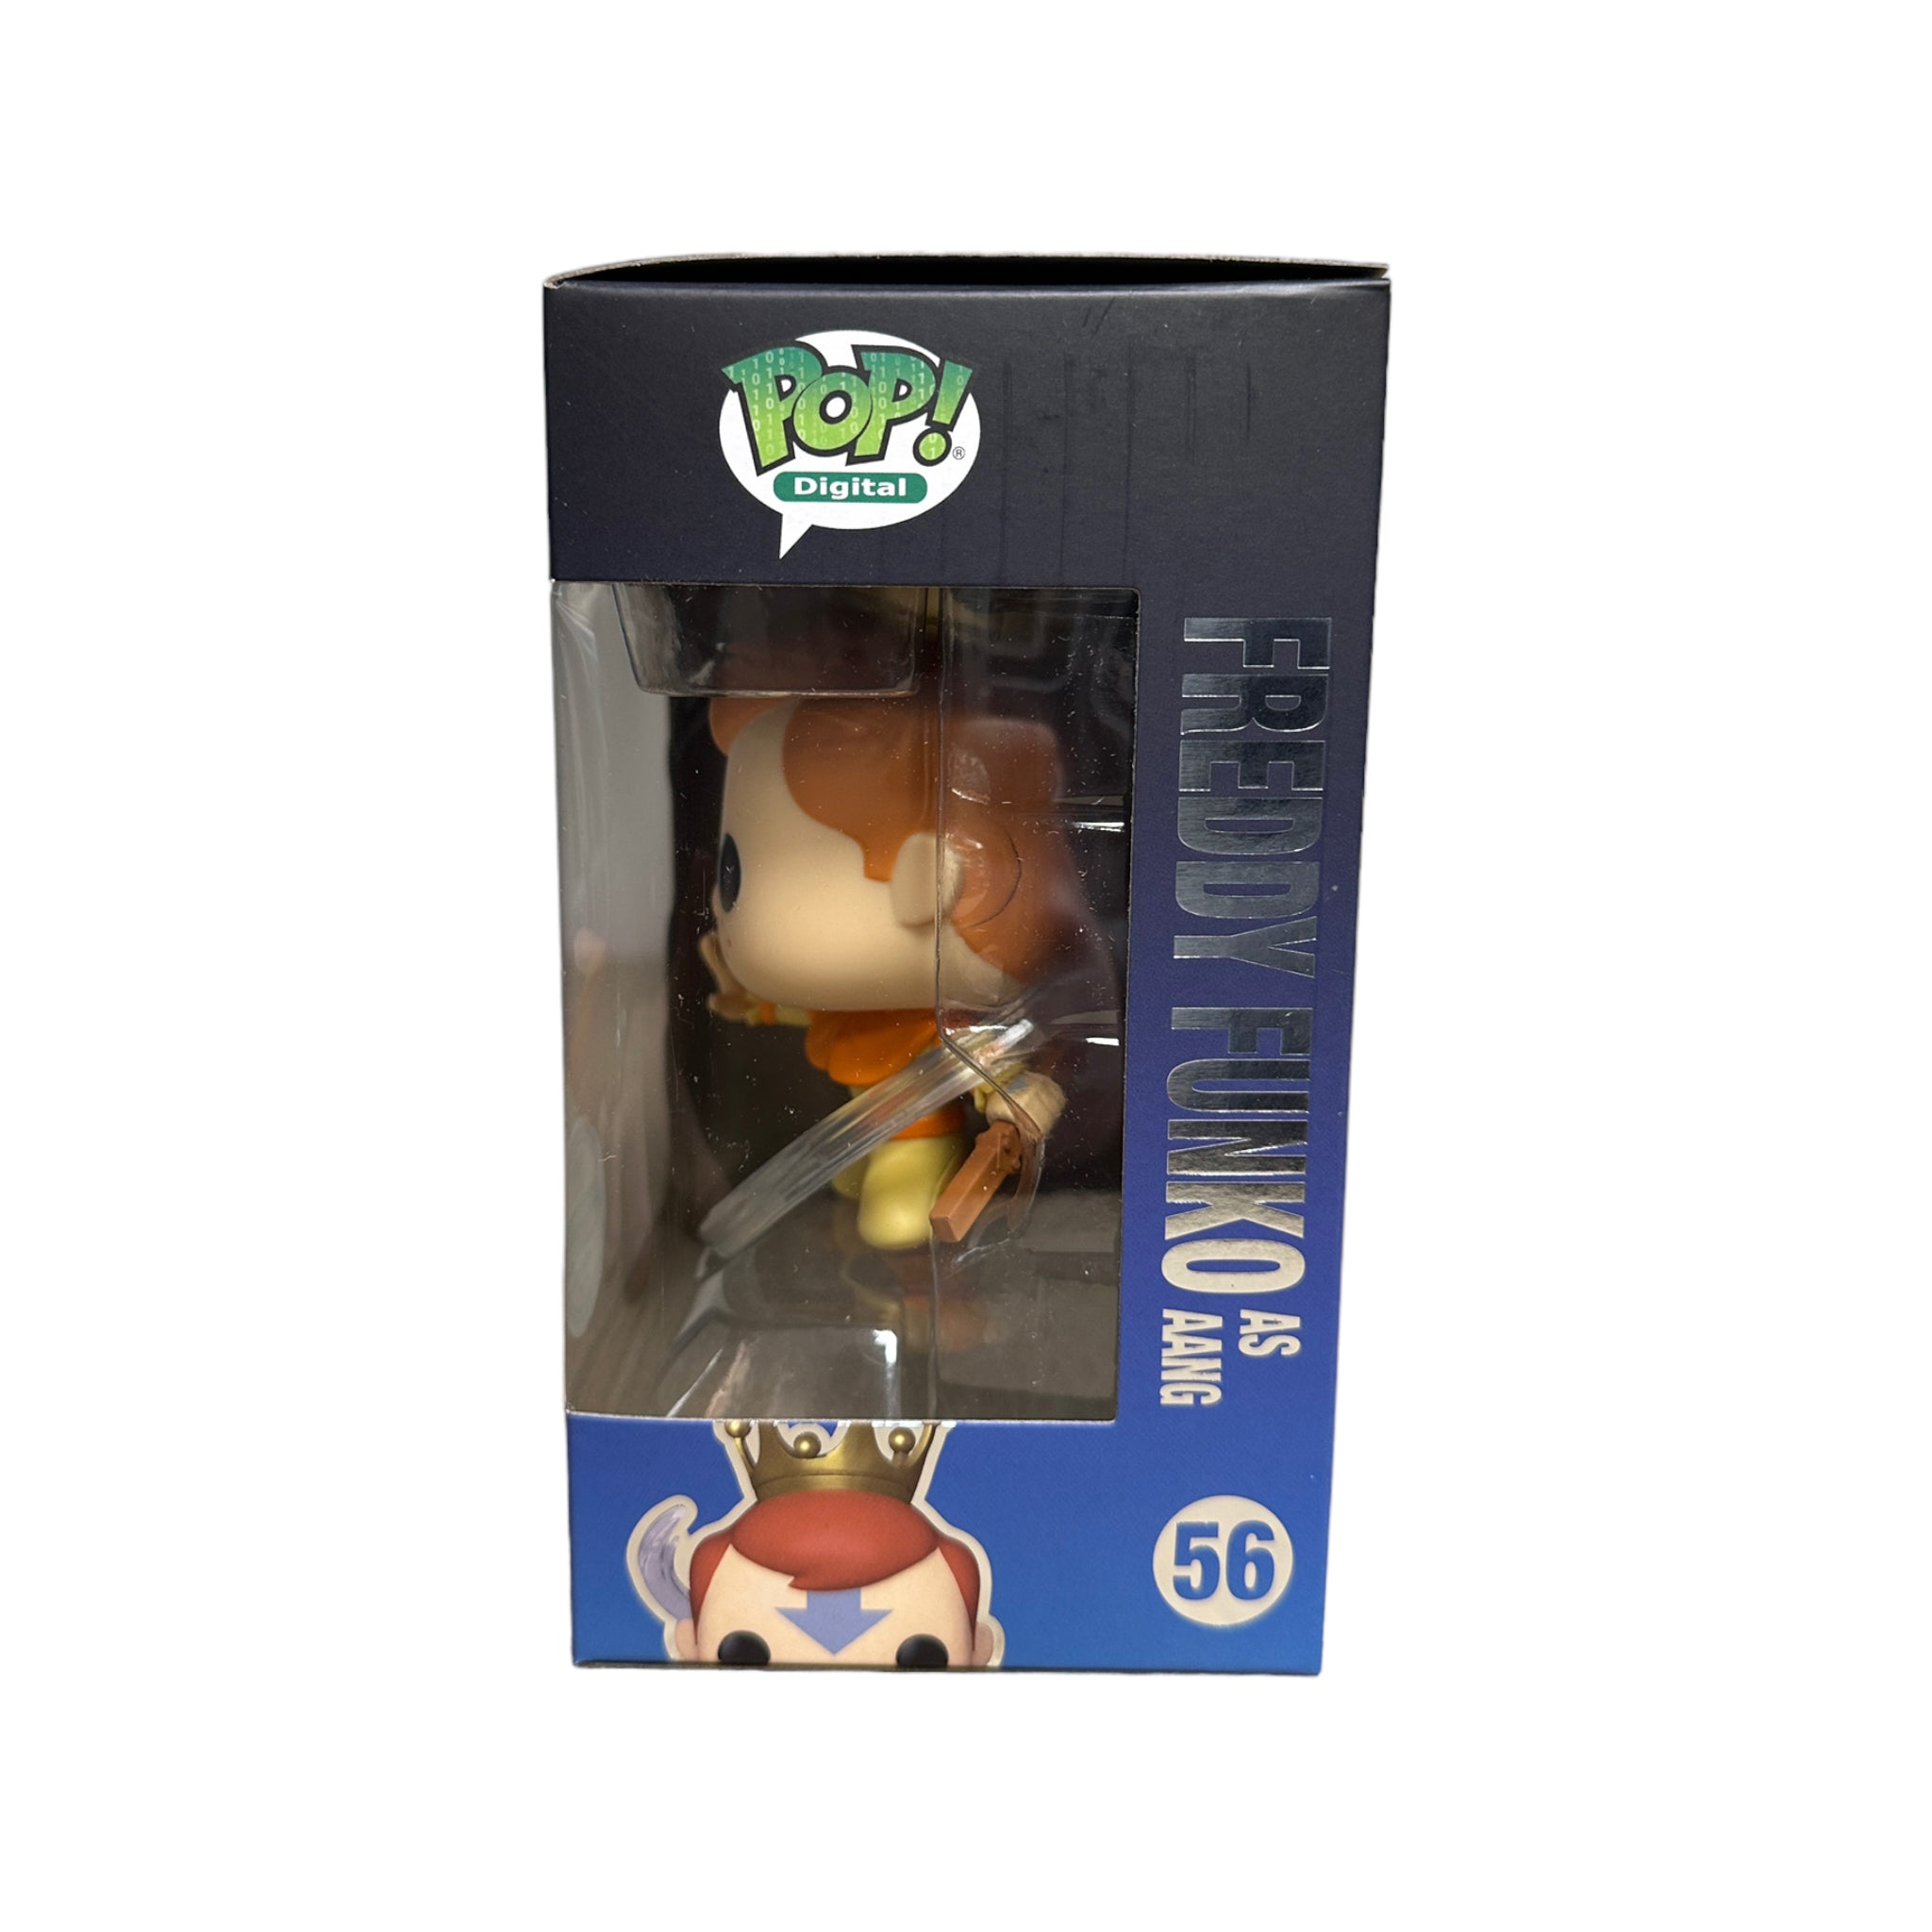 Freddy Funko as Aang #56 Funko Pop! - Avatar: The Last Airbender - NFT Release Exclusive LE4160 Pcs - Condition 9.5/10